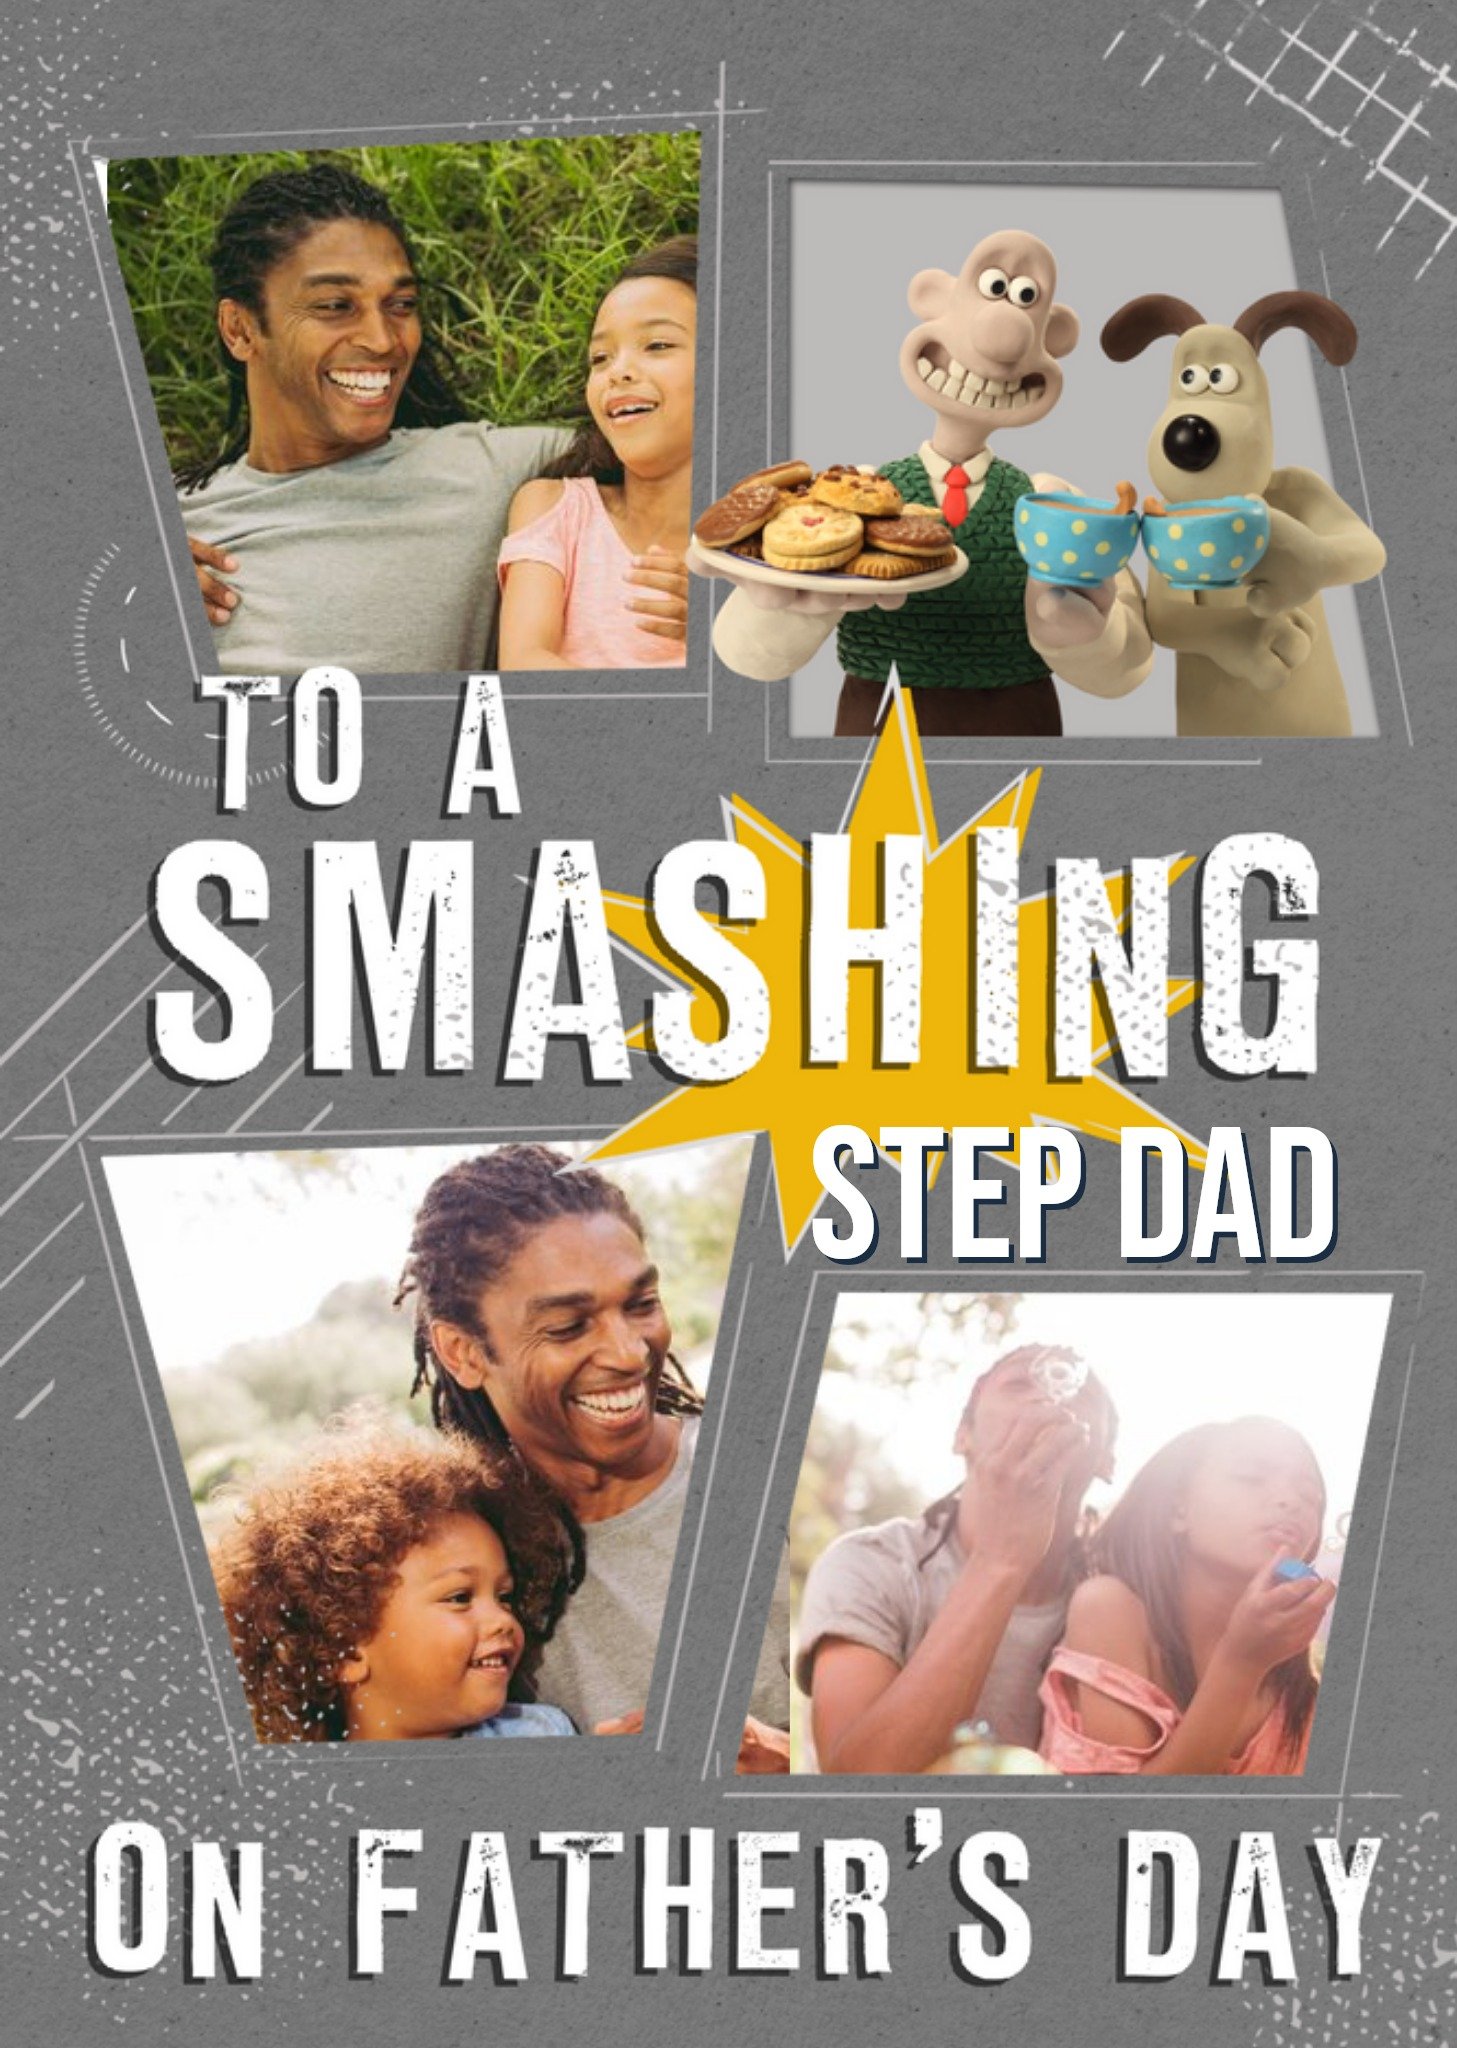 Wallace And Gromit To A Smashing Stepdad On Fathers Day Card Ecard